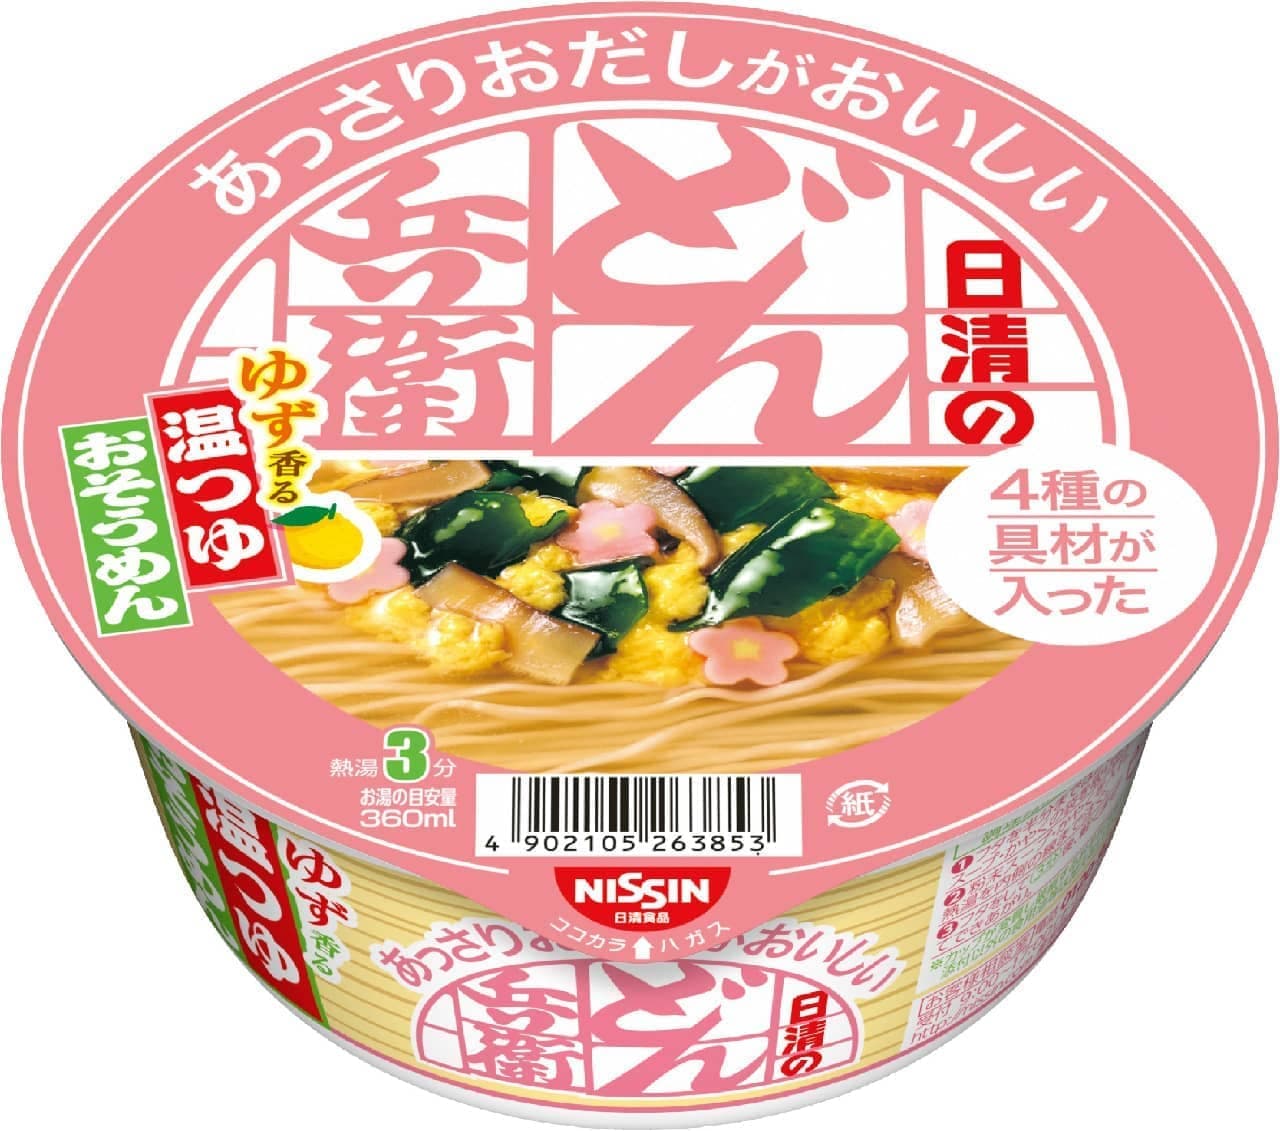 Nissin's light soup stock is delicious Donbei Warm soup with 4 kinds of ingredients